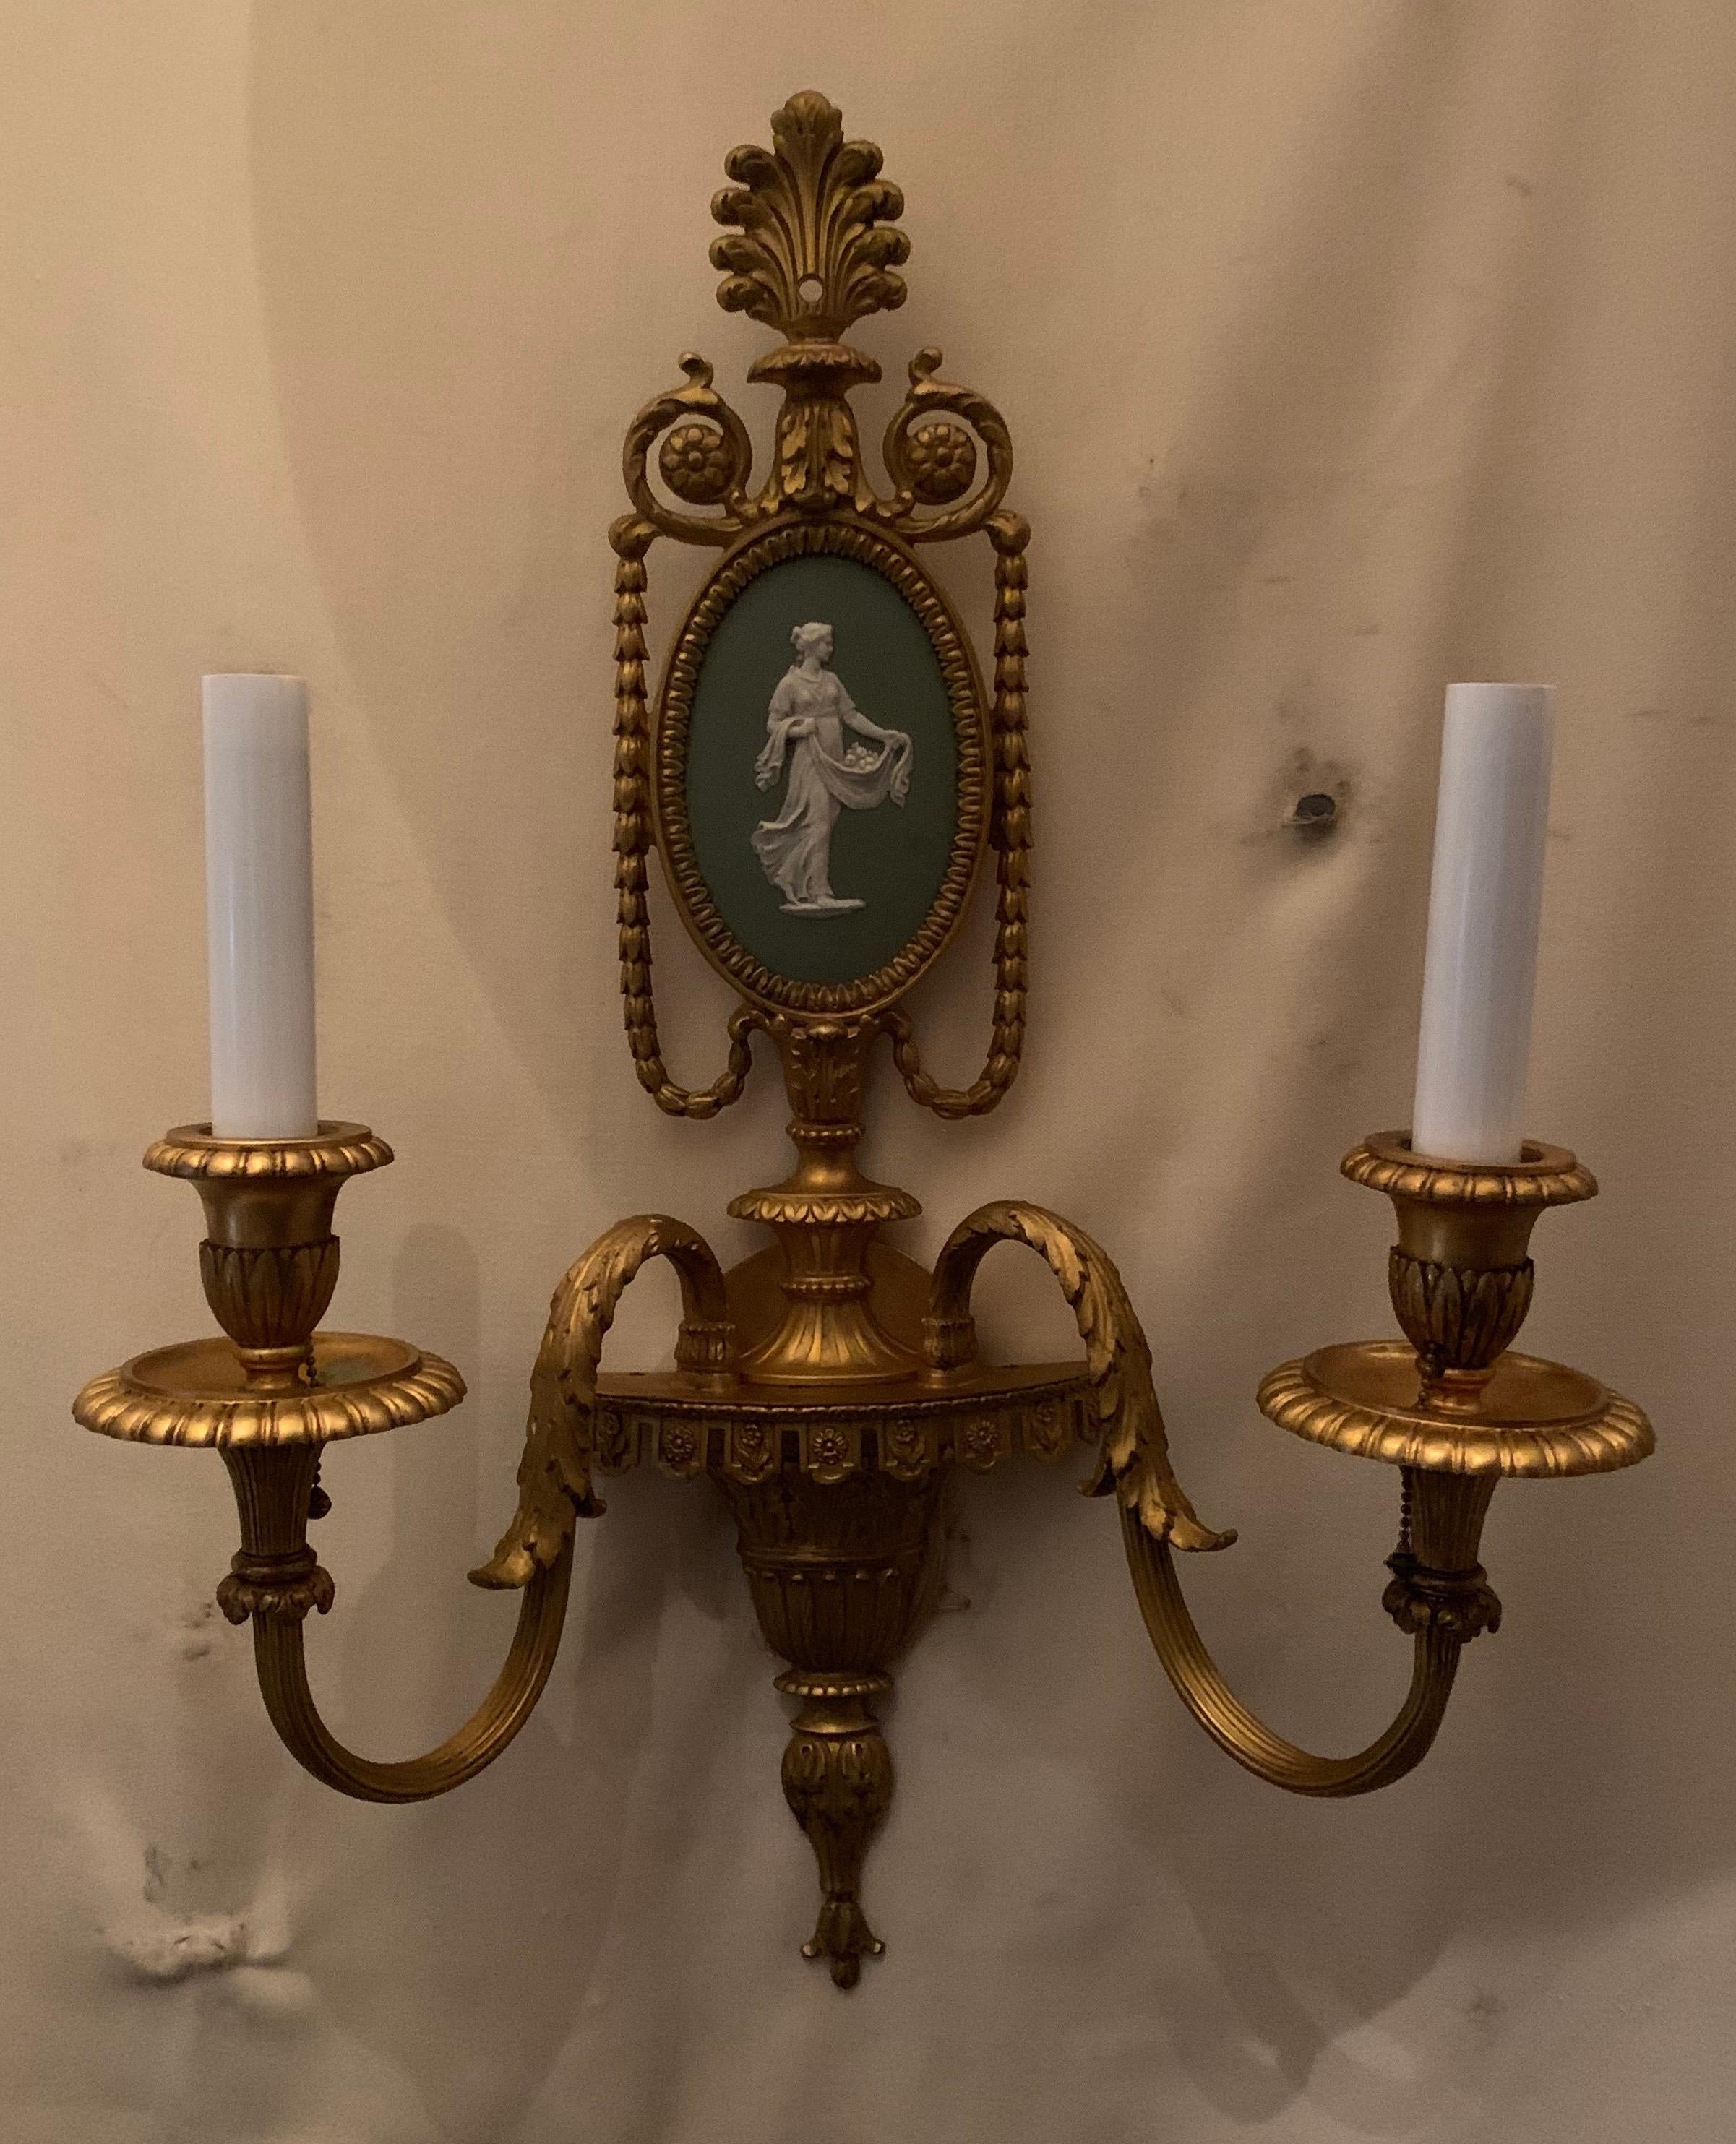 A wonderful pair of Caldwell light green Wedgwood plaque and doré bronze ormolu neoclassical 2 candelabra pull chain sconces completely rewired with original sockets intact ready to install and enjoy.